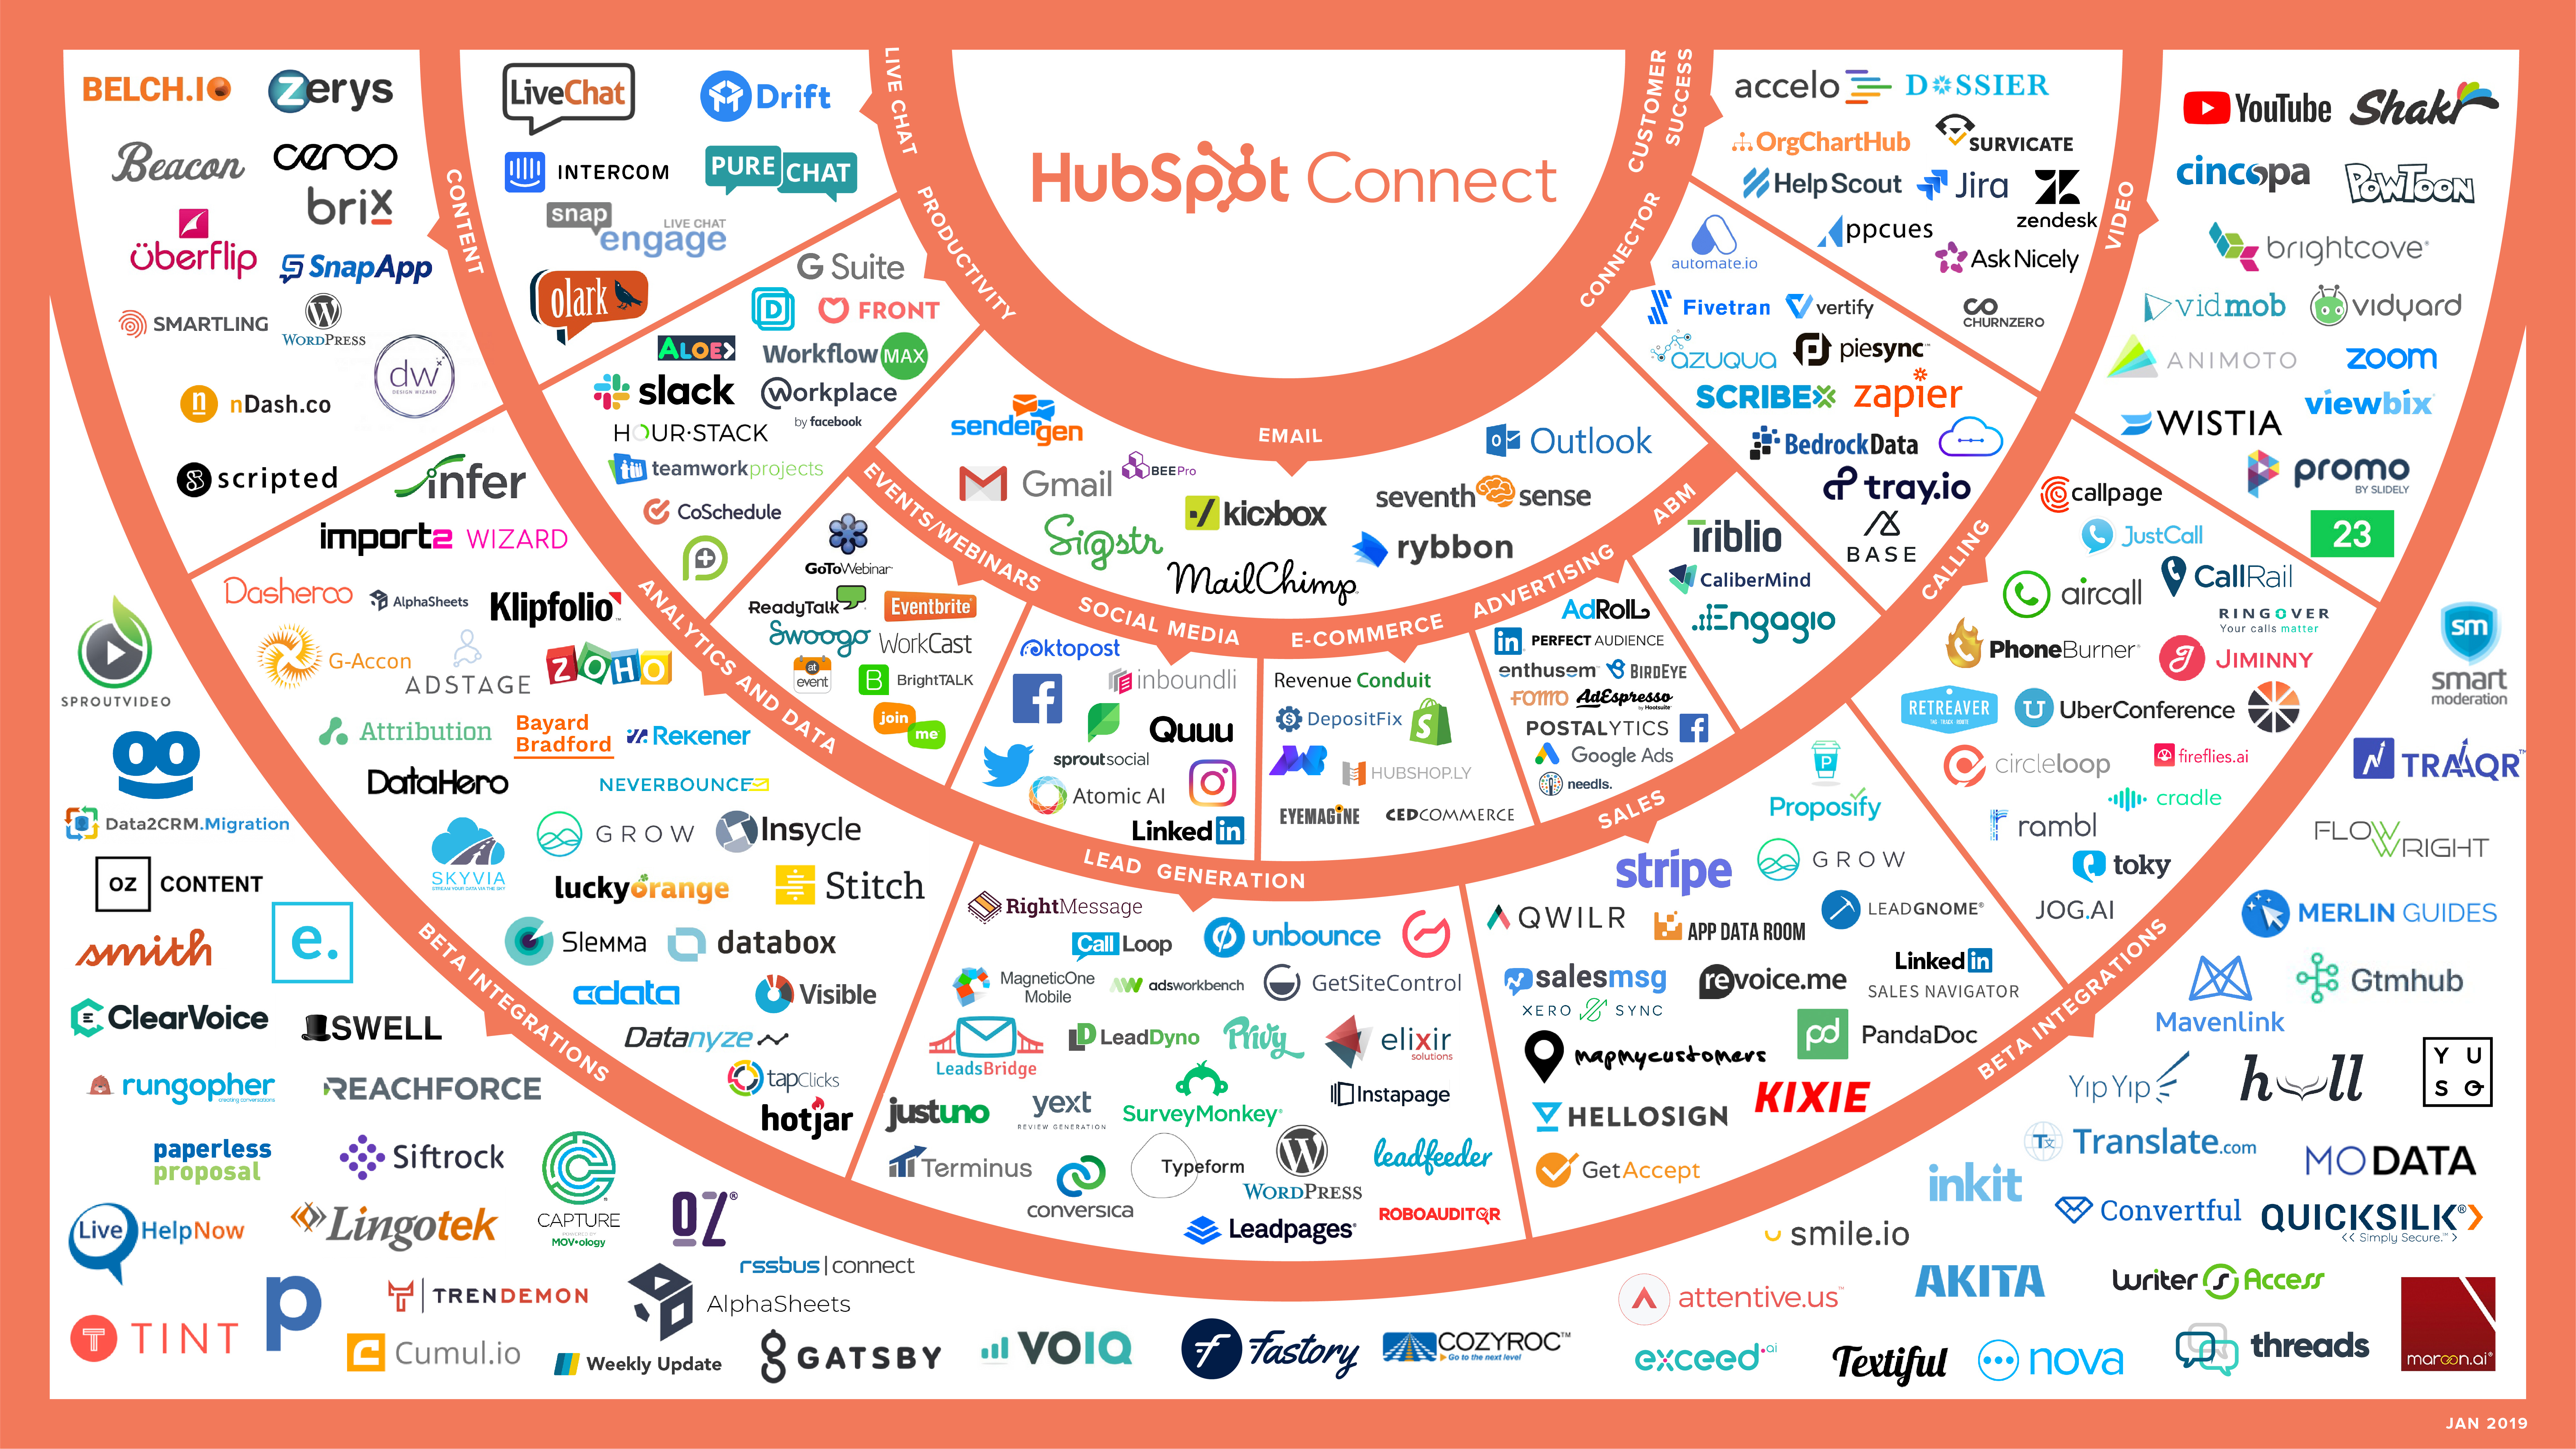 A Guide to Getting Started with Integrations in HubSpot